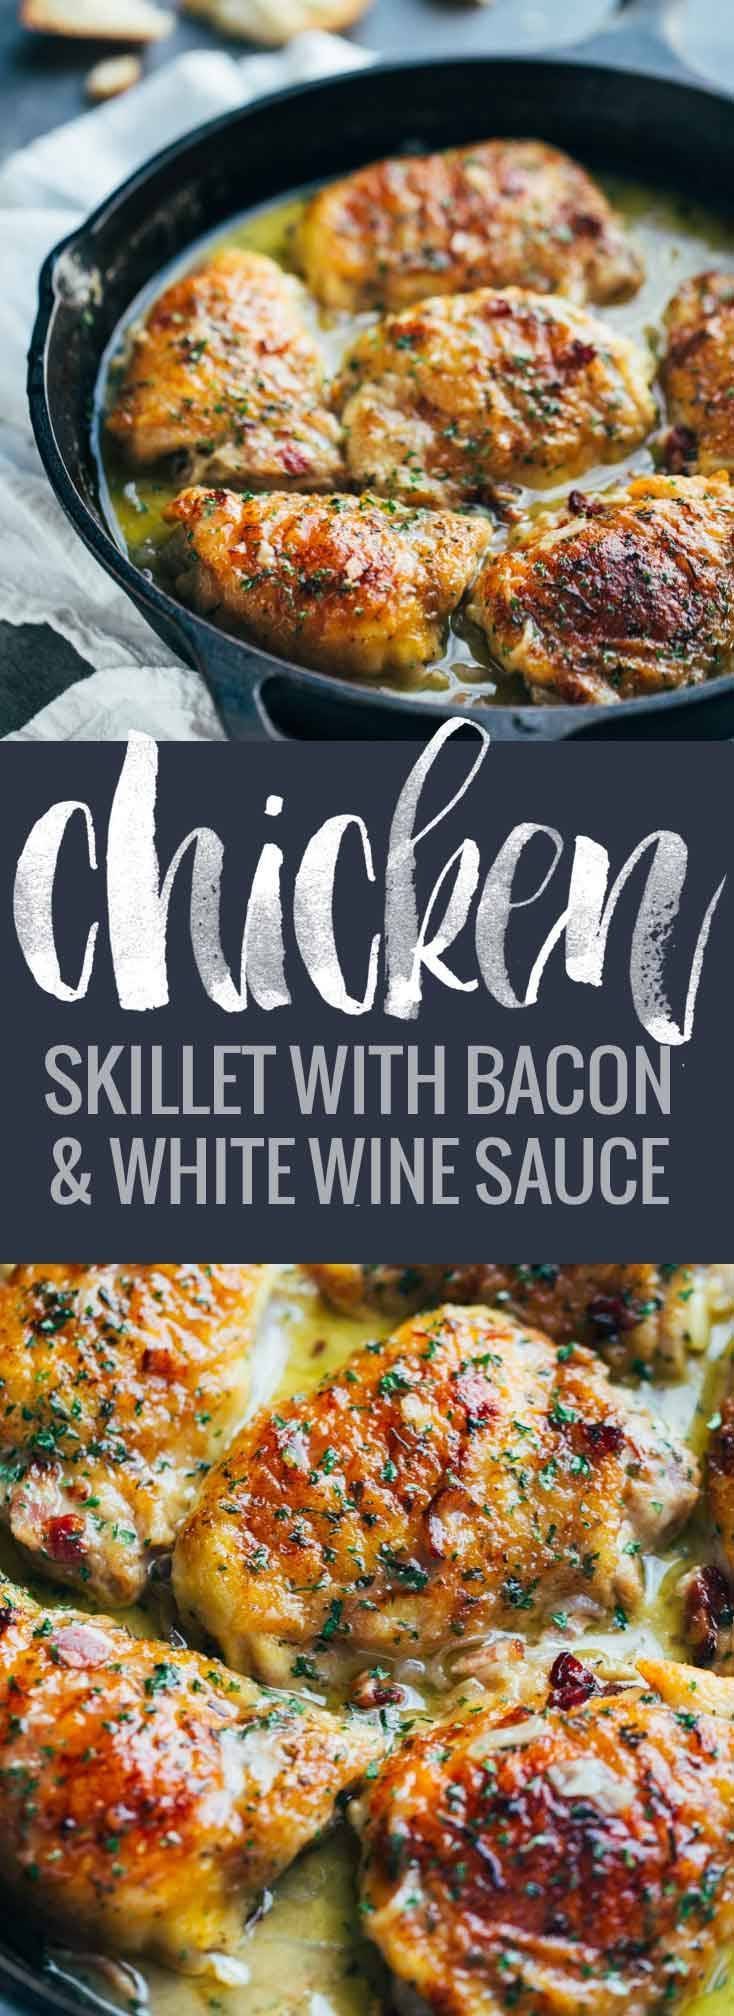 Skillet Chicken with Bacon and White Wine Sauce - a simple one-pot crowd-pleasing chicken recipe that goes perfectly with warm bread and a green salad!